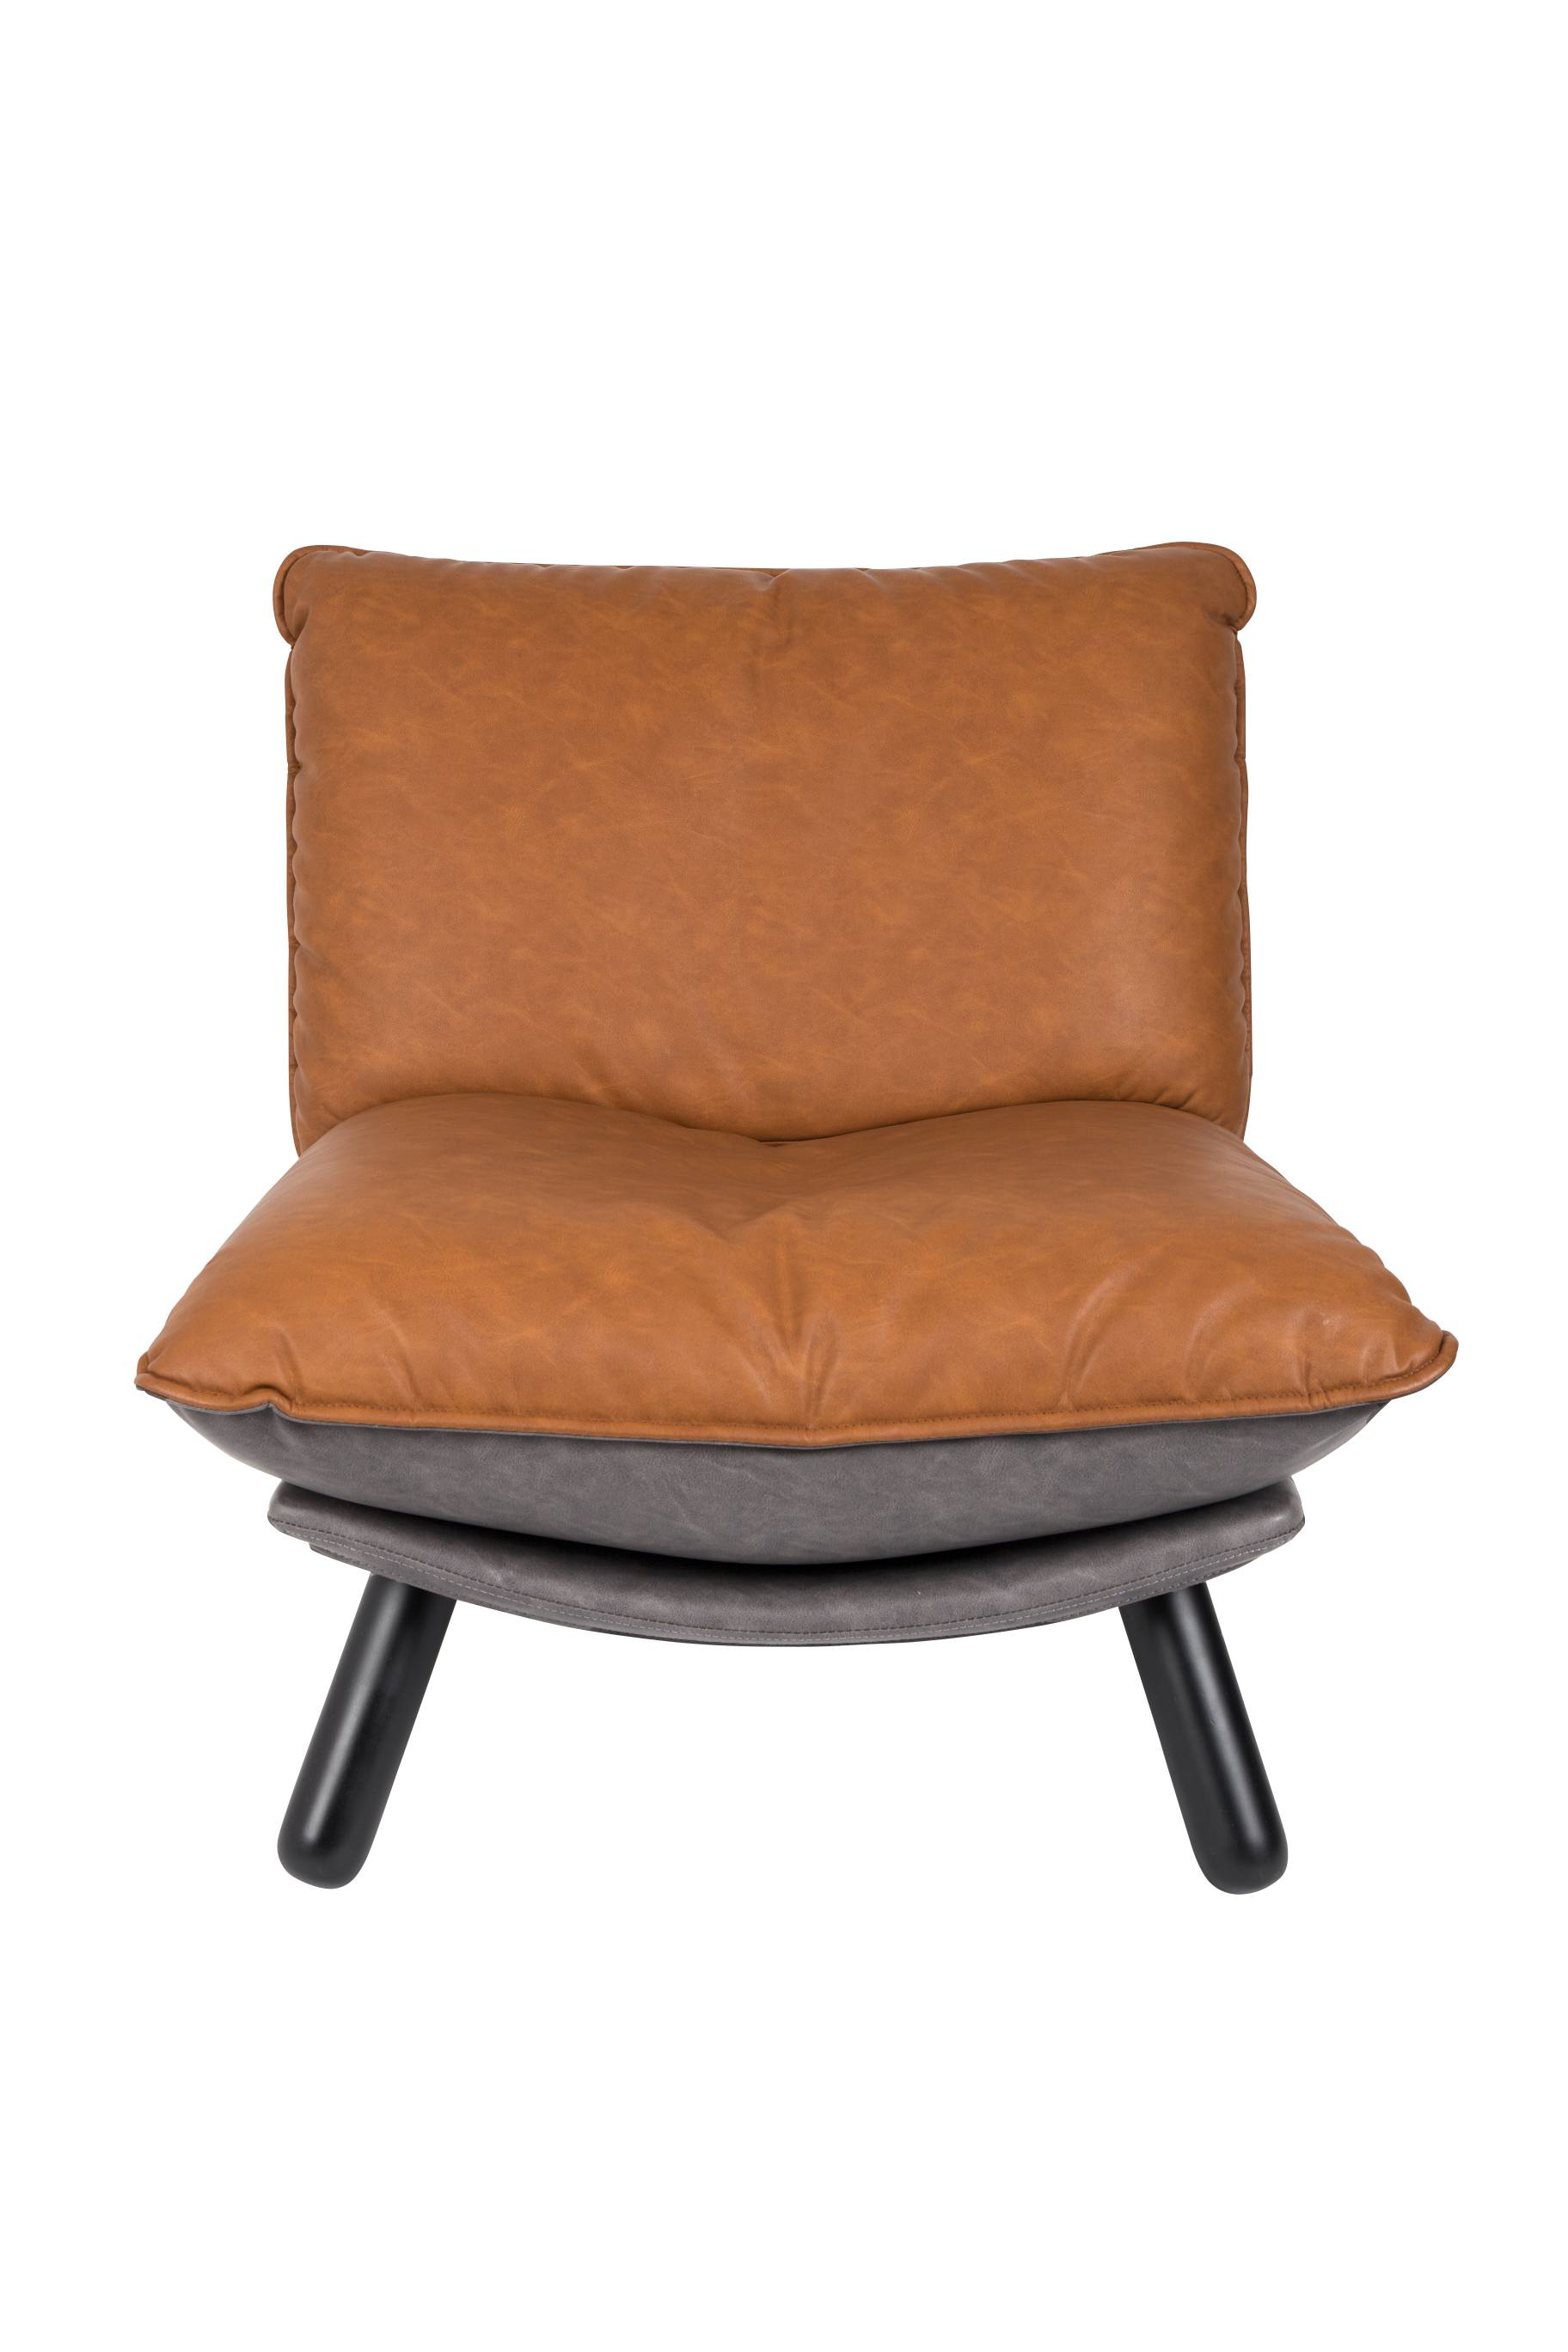 Zuiver | LOUNGE CHAIR LAZY SACK  LL BROWN Default Title